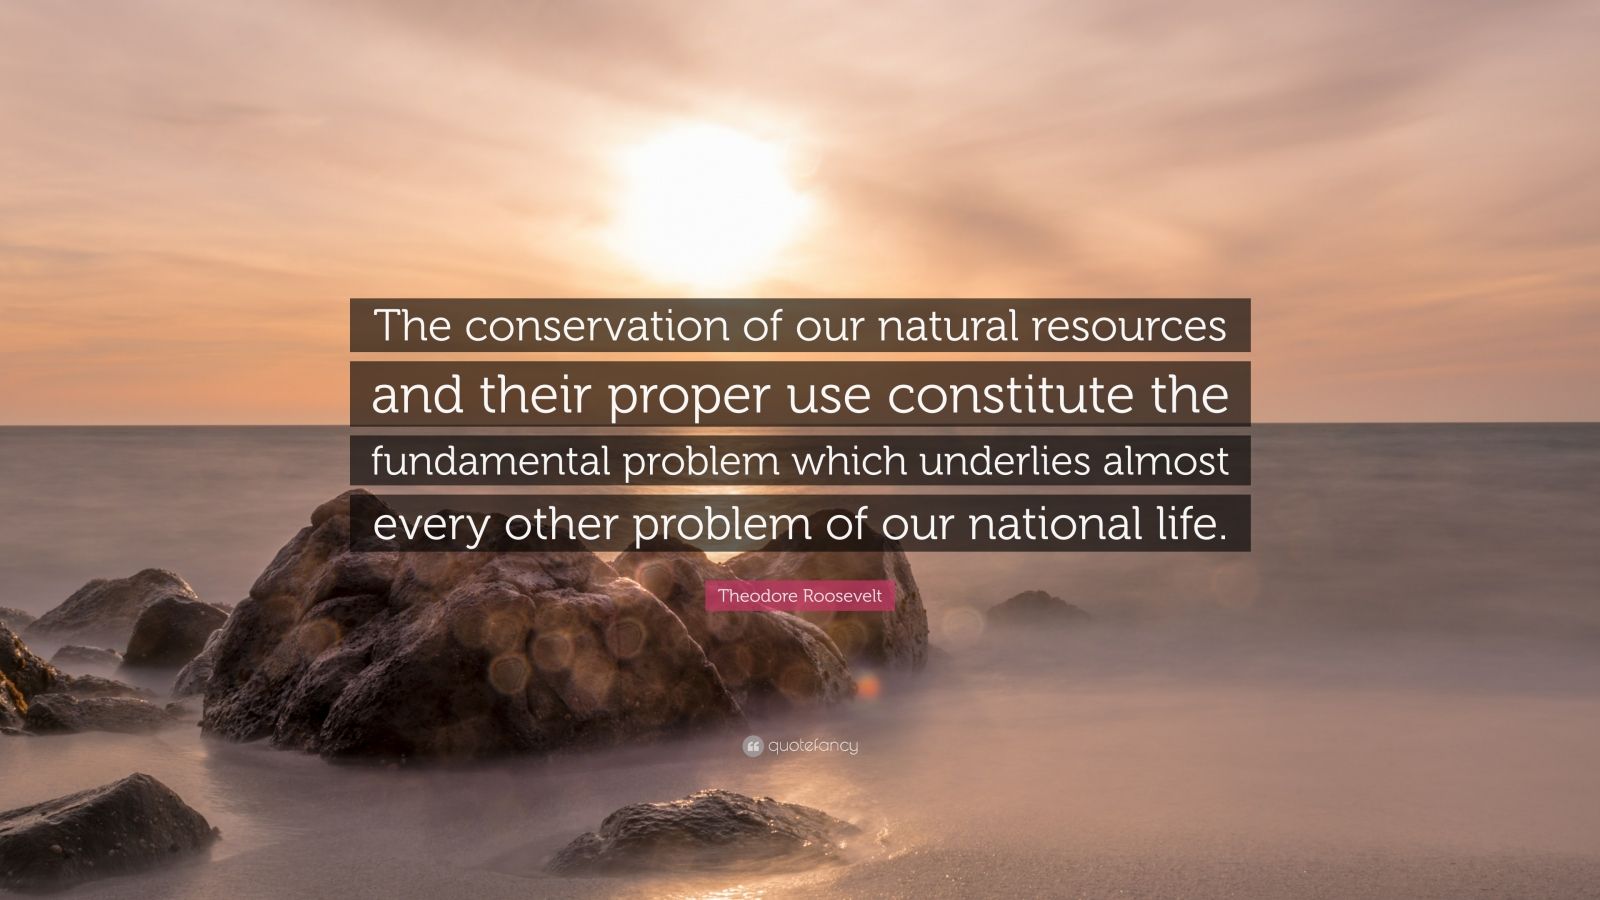 Theodore Roosevelt Quote: “The conservation of our natural resources ...